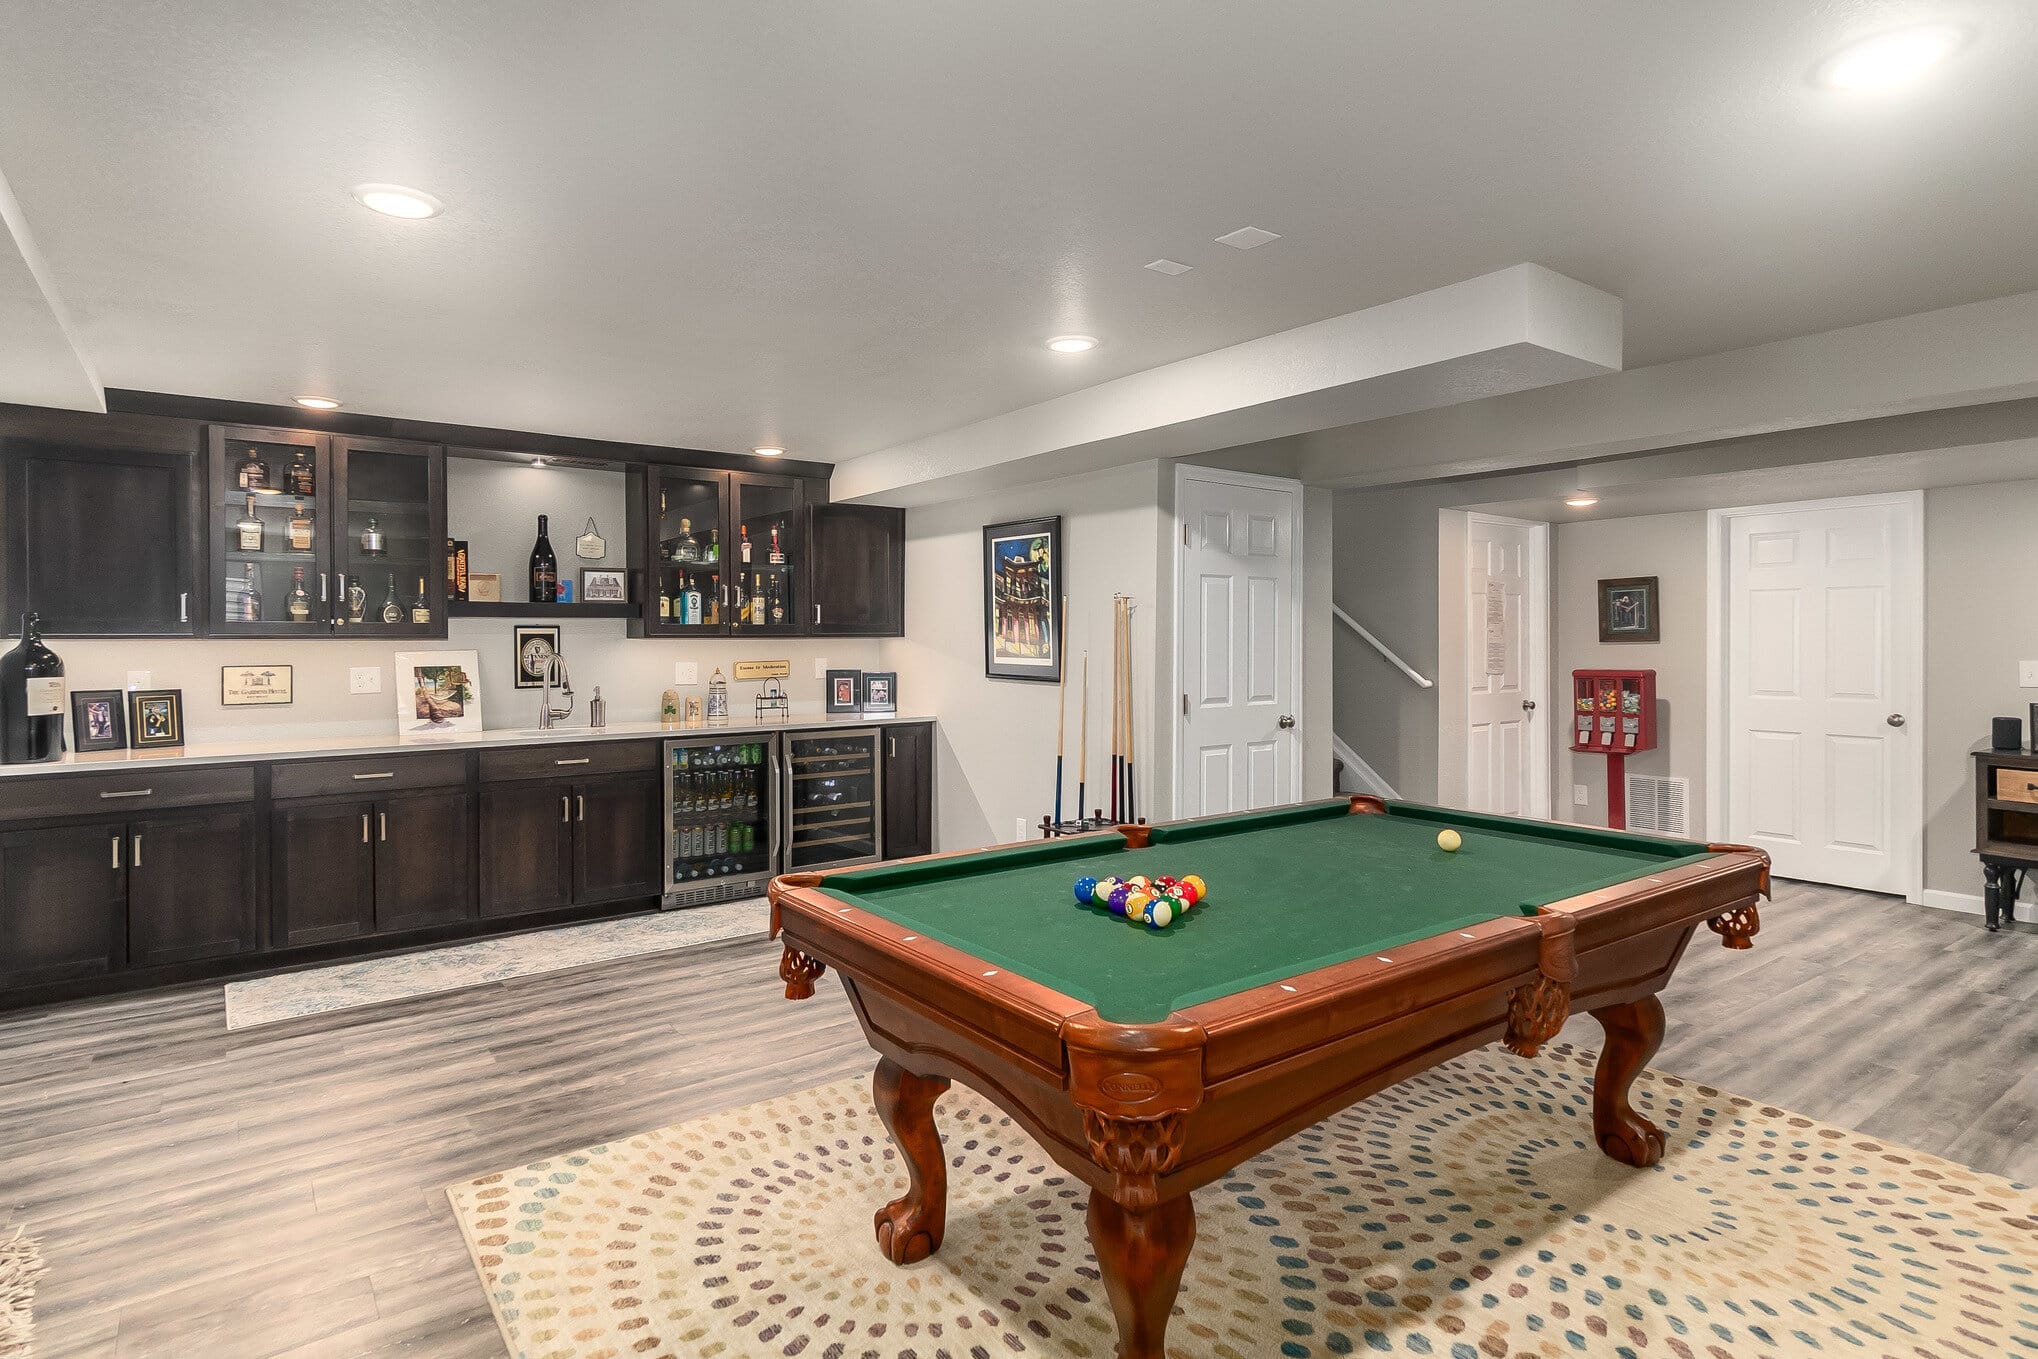 Downstairs game room with pool table and wet bar